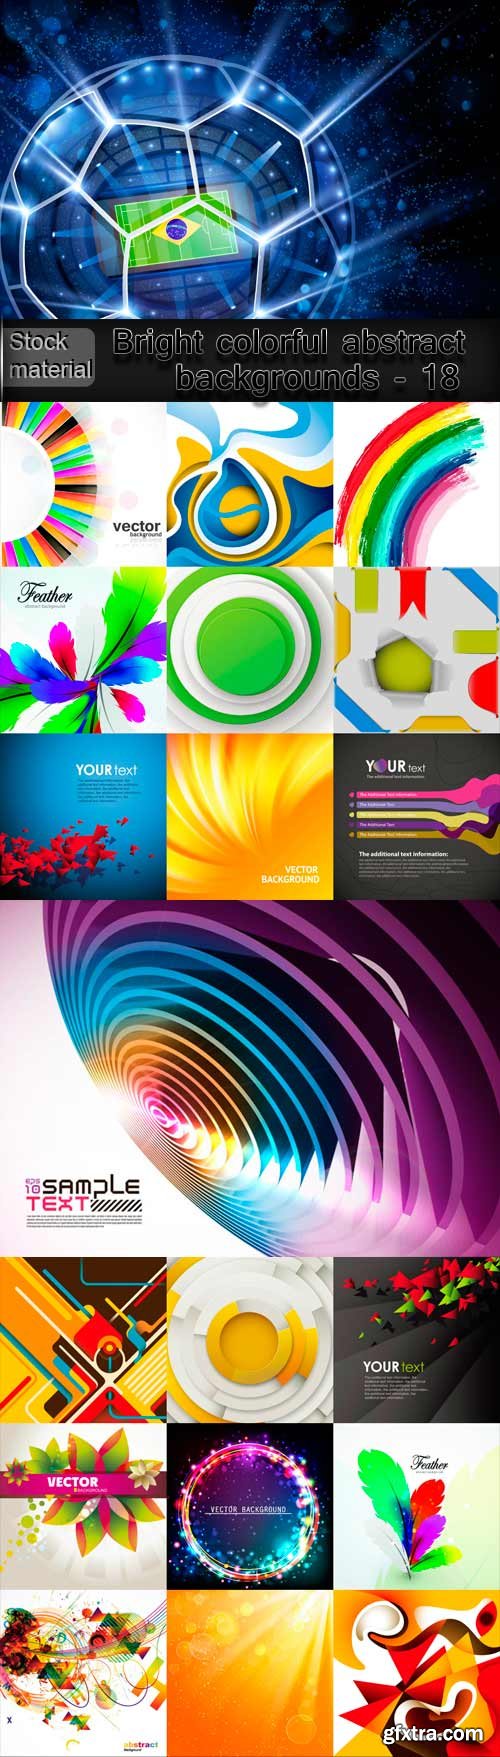 Bright colorful abstract backgrounds vector - 18